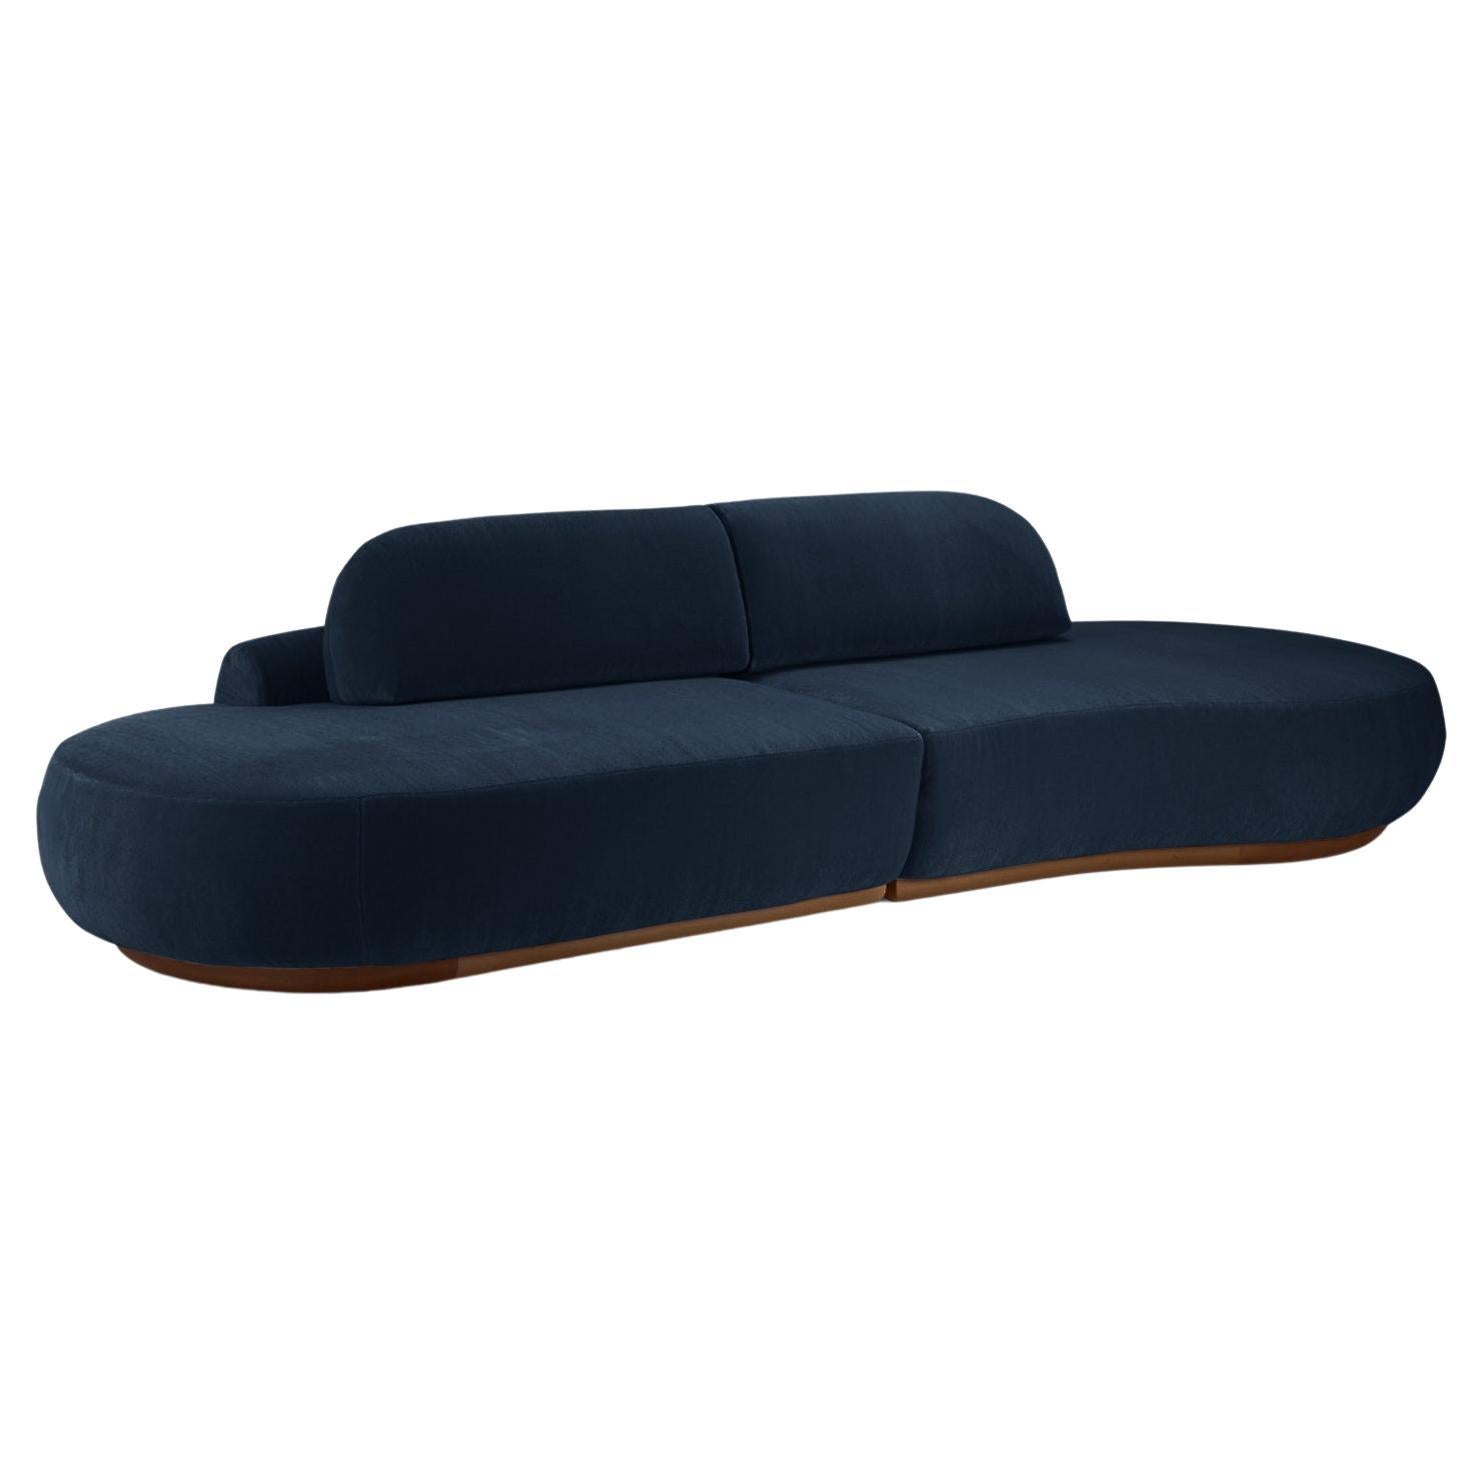 Naked Curved Sectional Sofa, 2 Piece with Beech Ash-056-1 and Paris Black For Sale